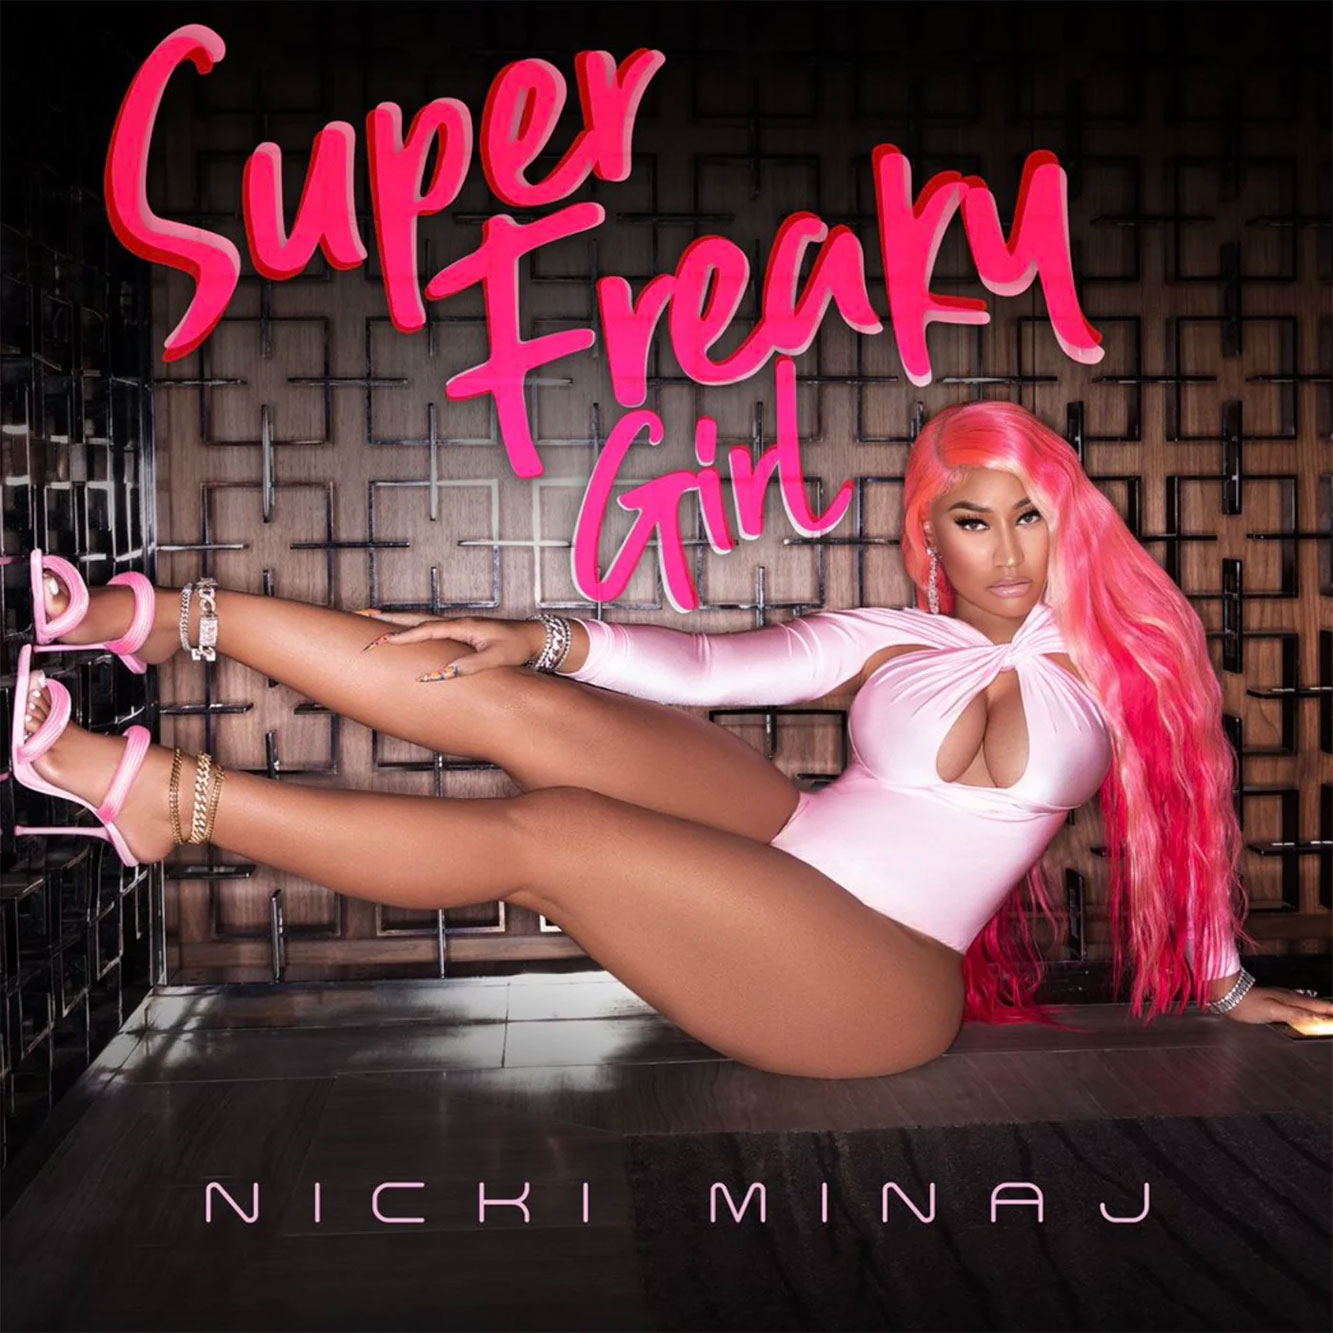 Nicki Minaj lands first solo Hot 100 No. 1 with Super Freaky Girl